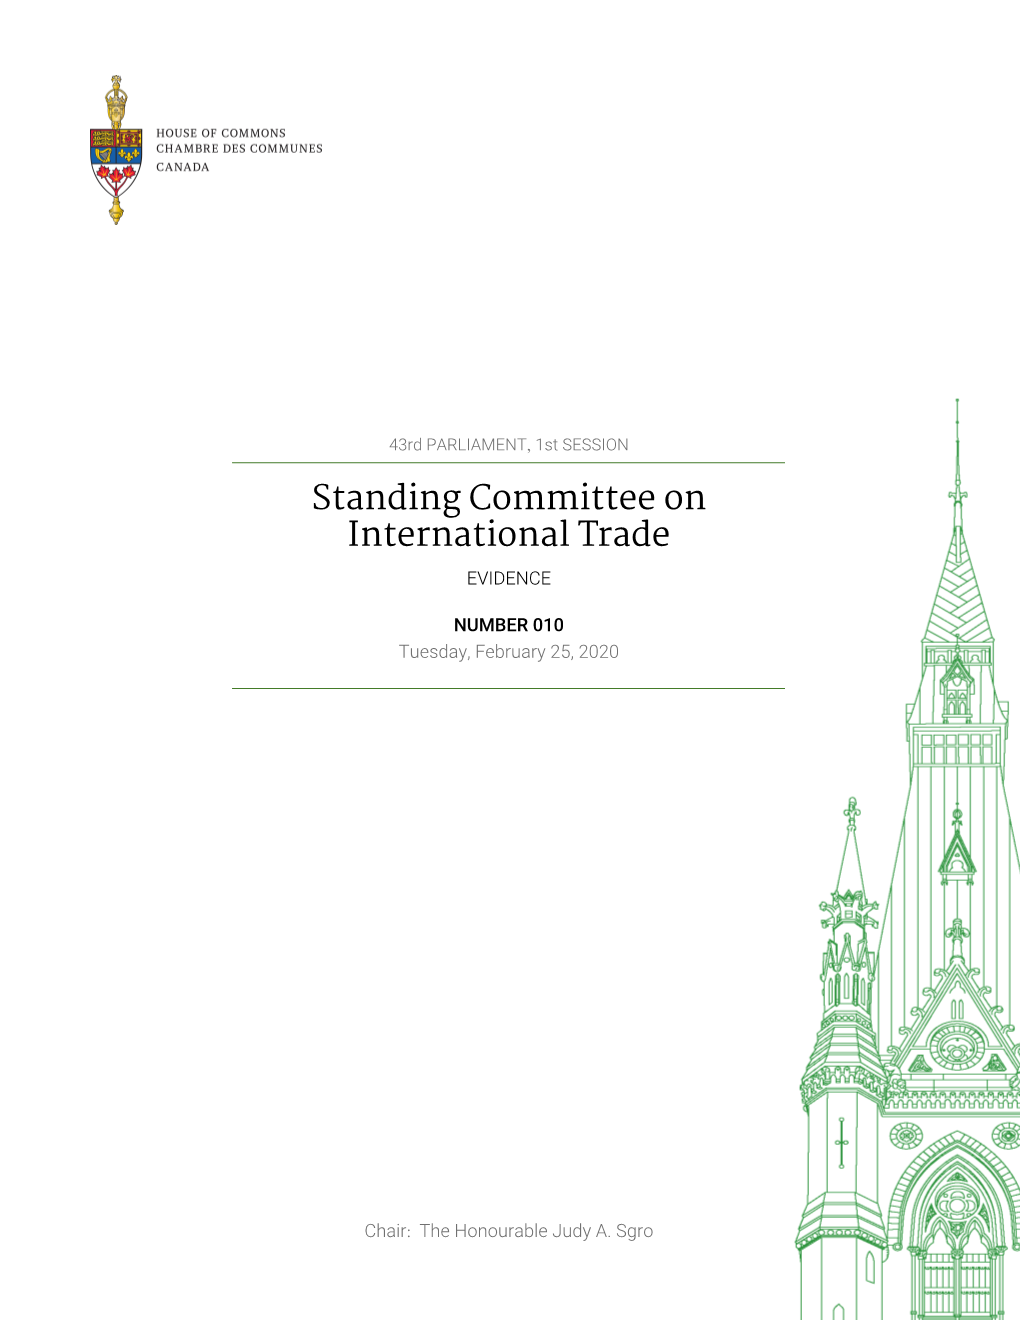 Evidence of the Standing Committee on International Trade